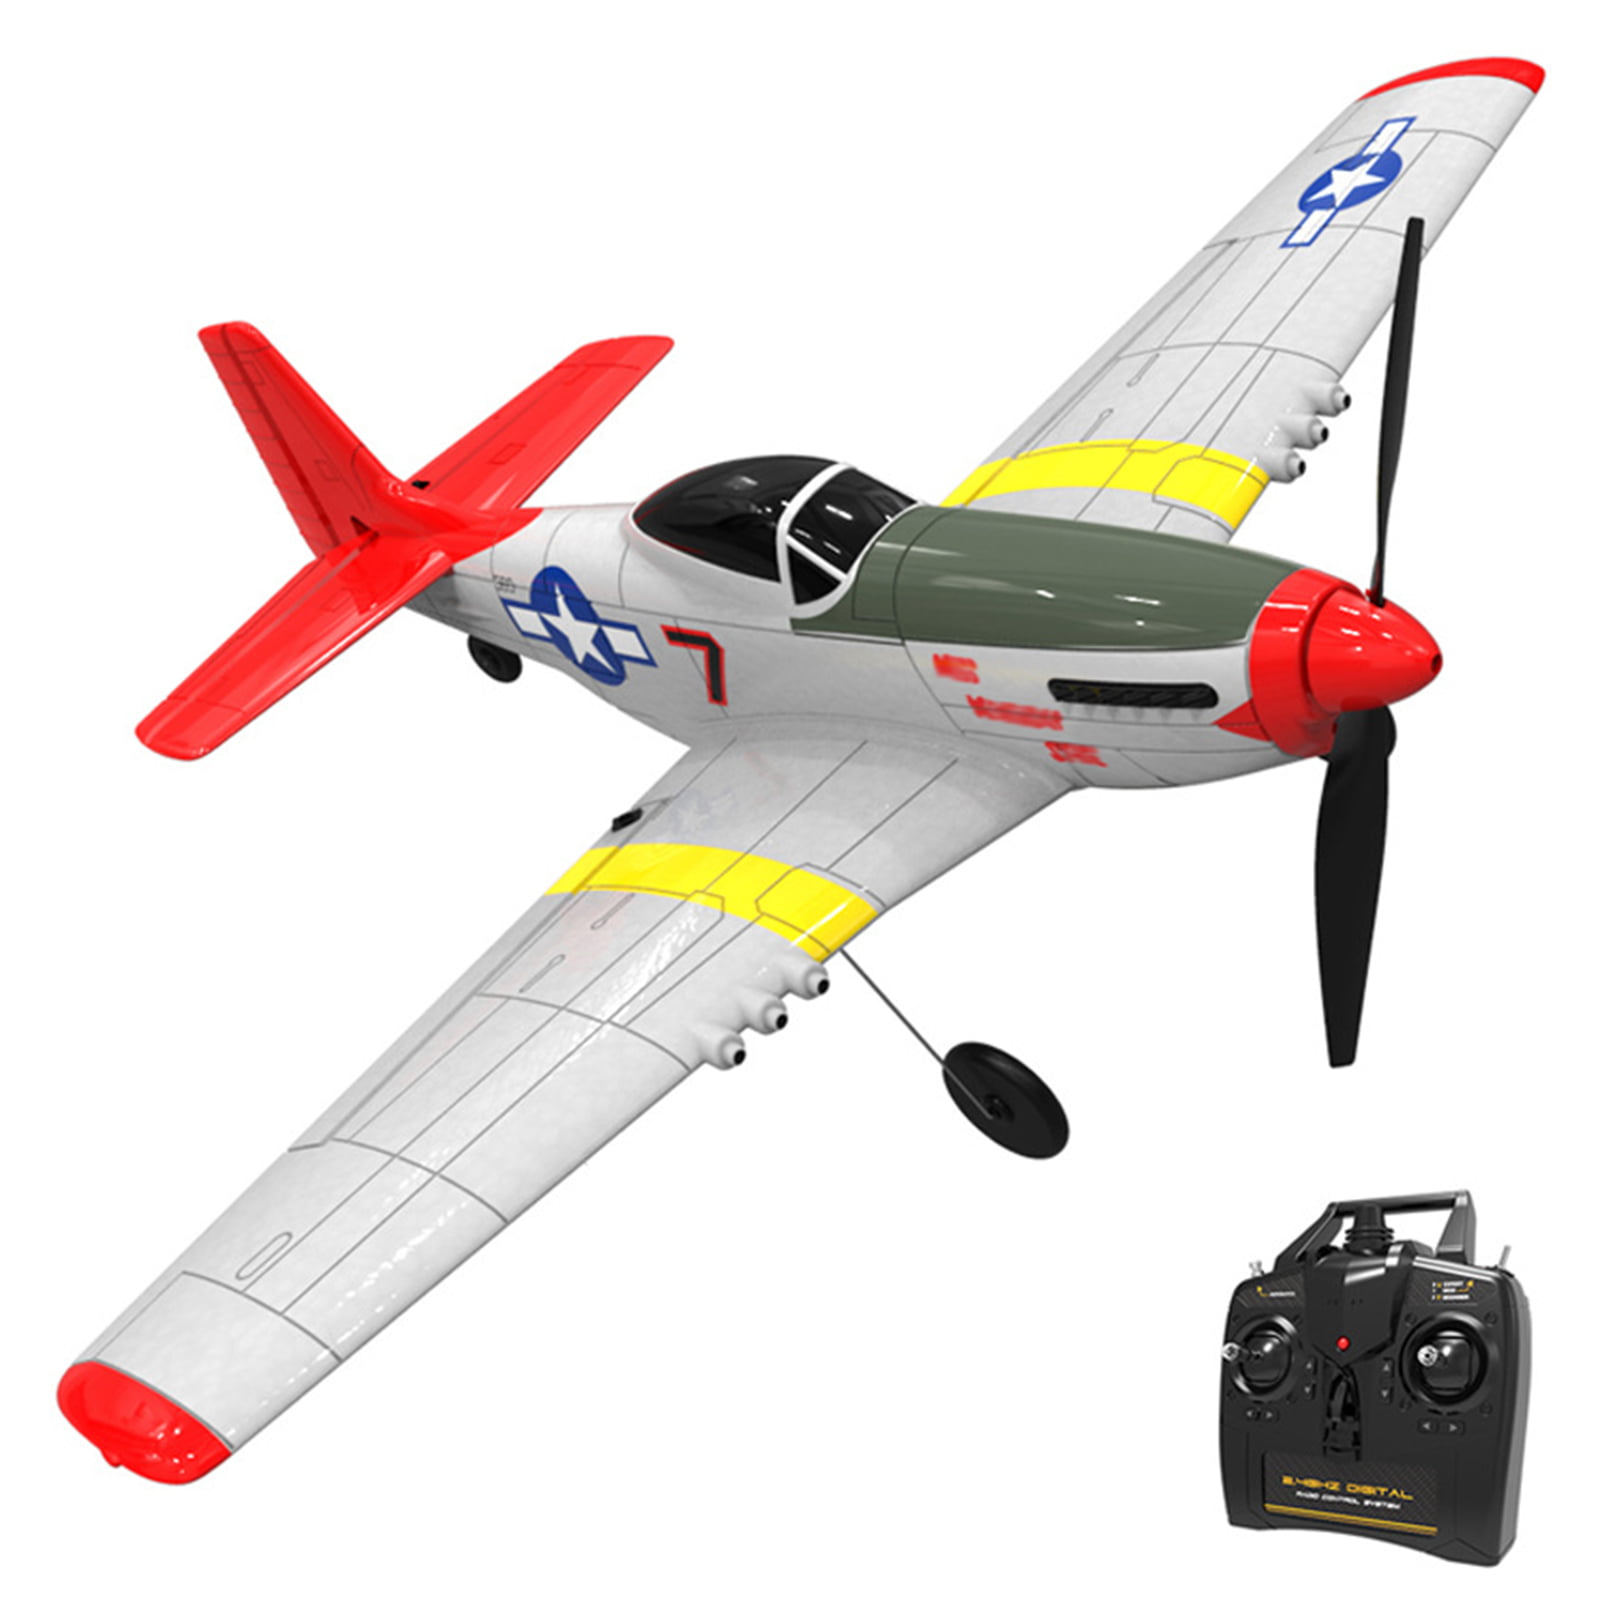 RC Aircraft Flight Toys with One-Key Aerobatic One-Key U-Turn for Adults and Kids 2.4GHz 4CH Remote Control Airplane Ready to Fly RC Plane with 6-Axis Gyro GoolRC RC Airplane 